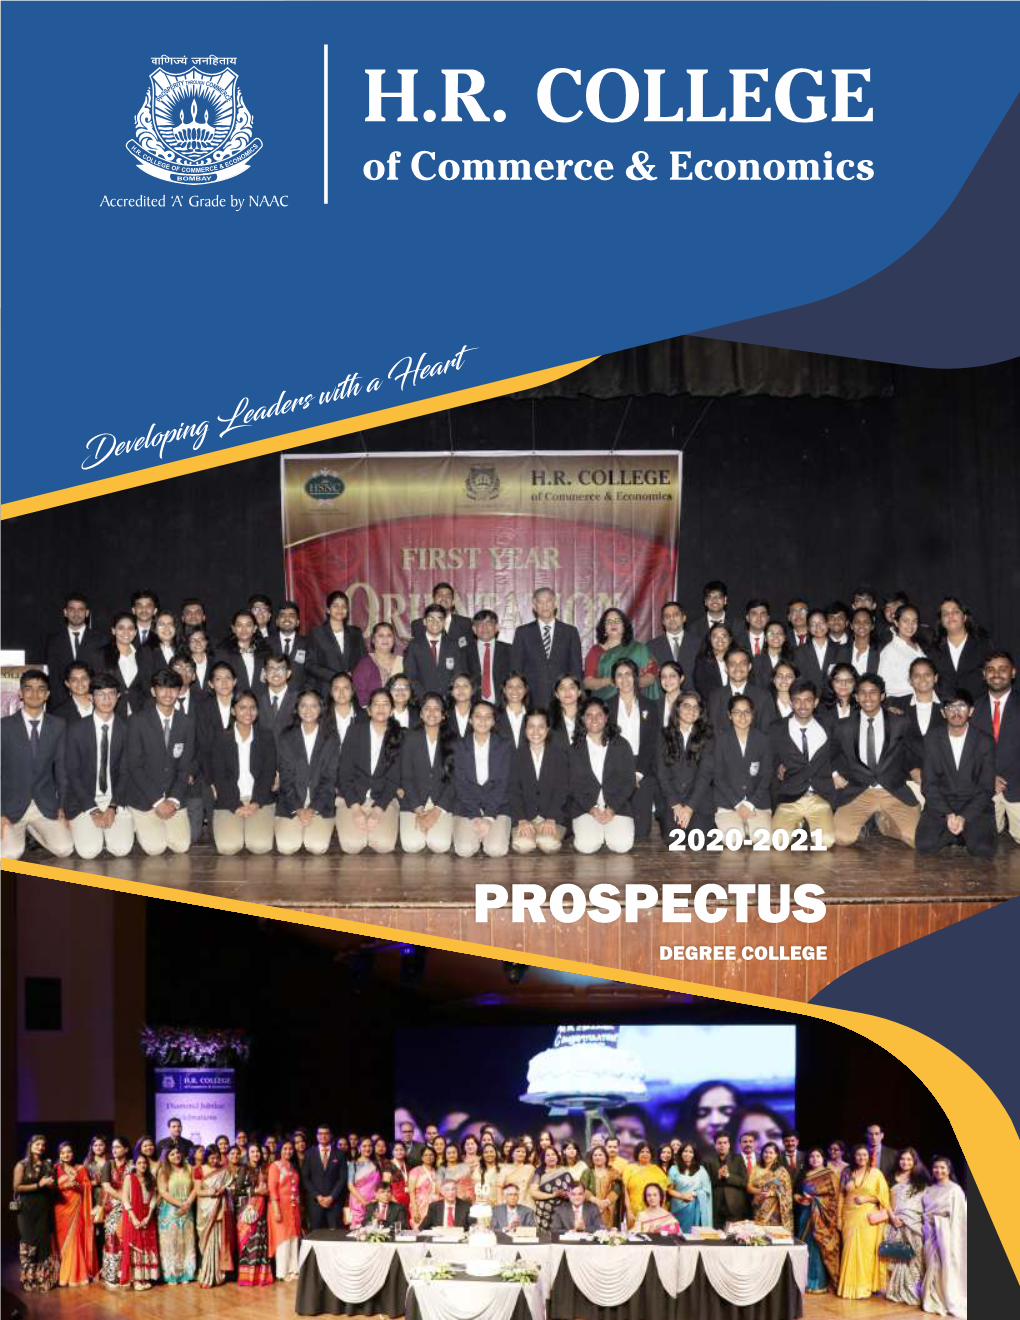 Prospectus Covers 2020-2021.Cdr